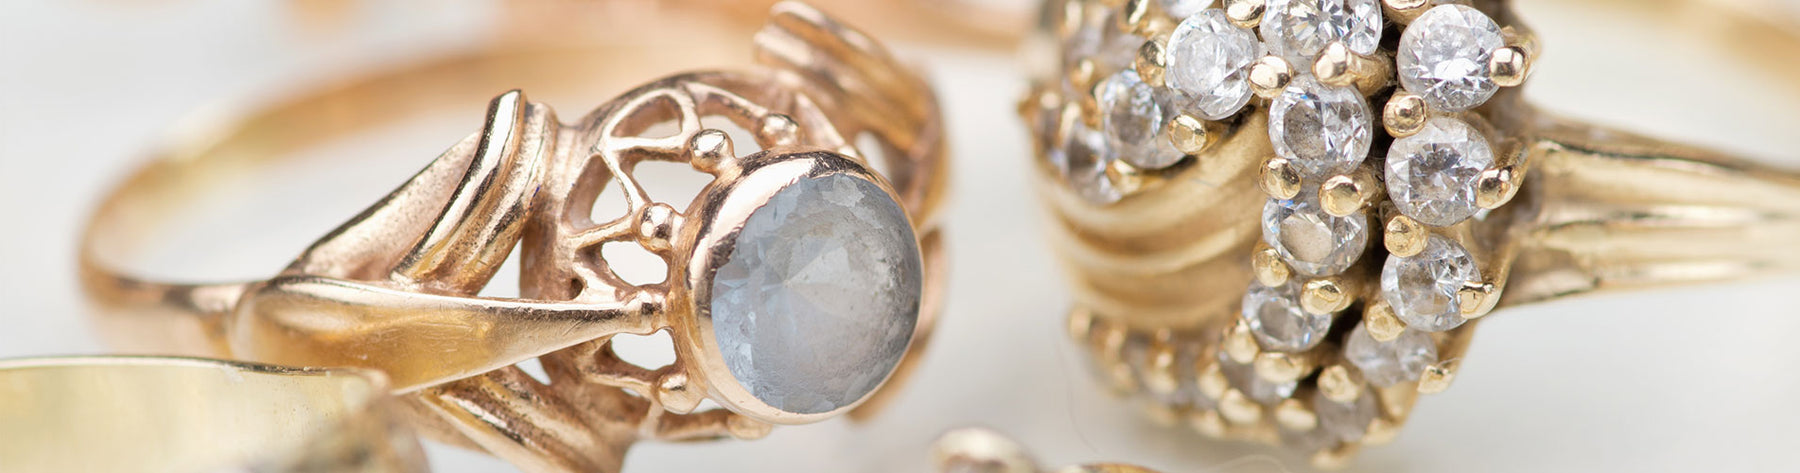 What Is Estate Jewelry? Meaning & Benefits